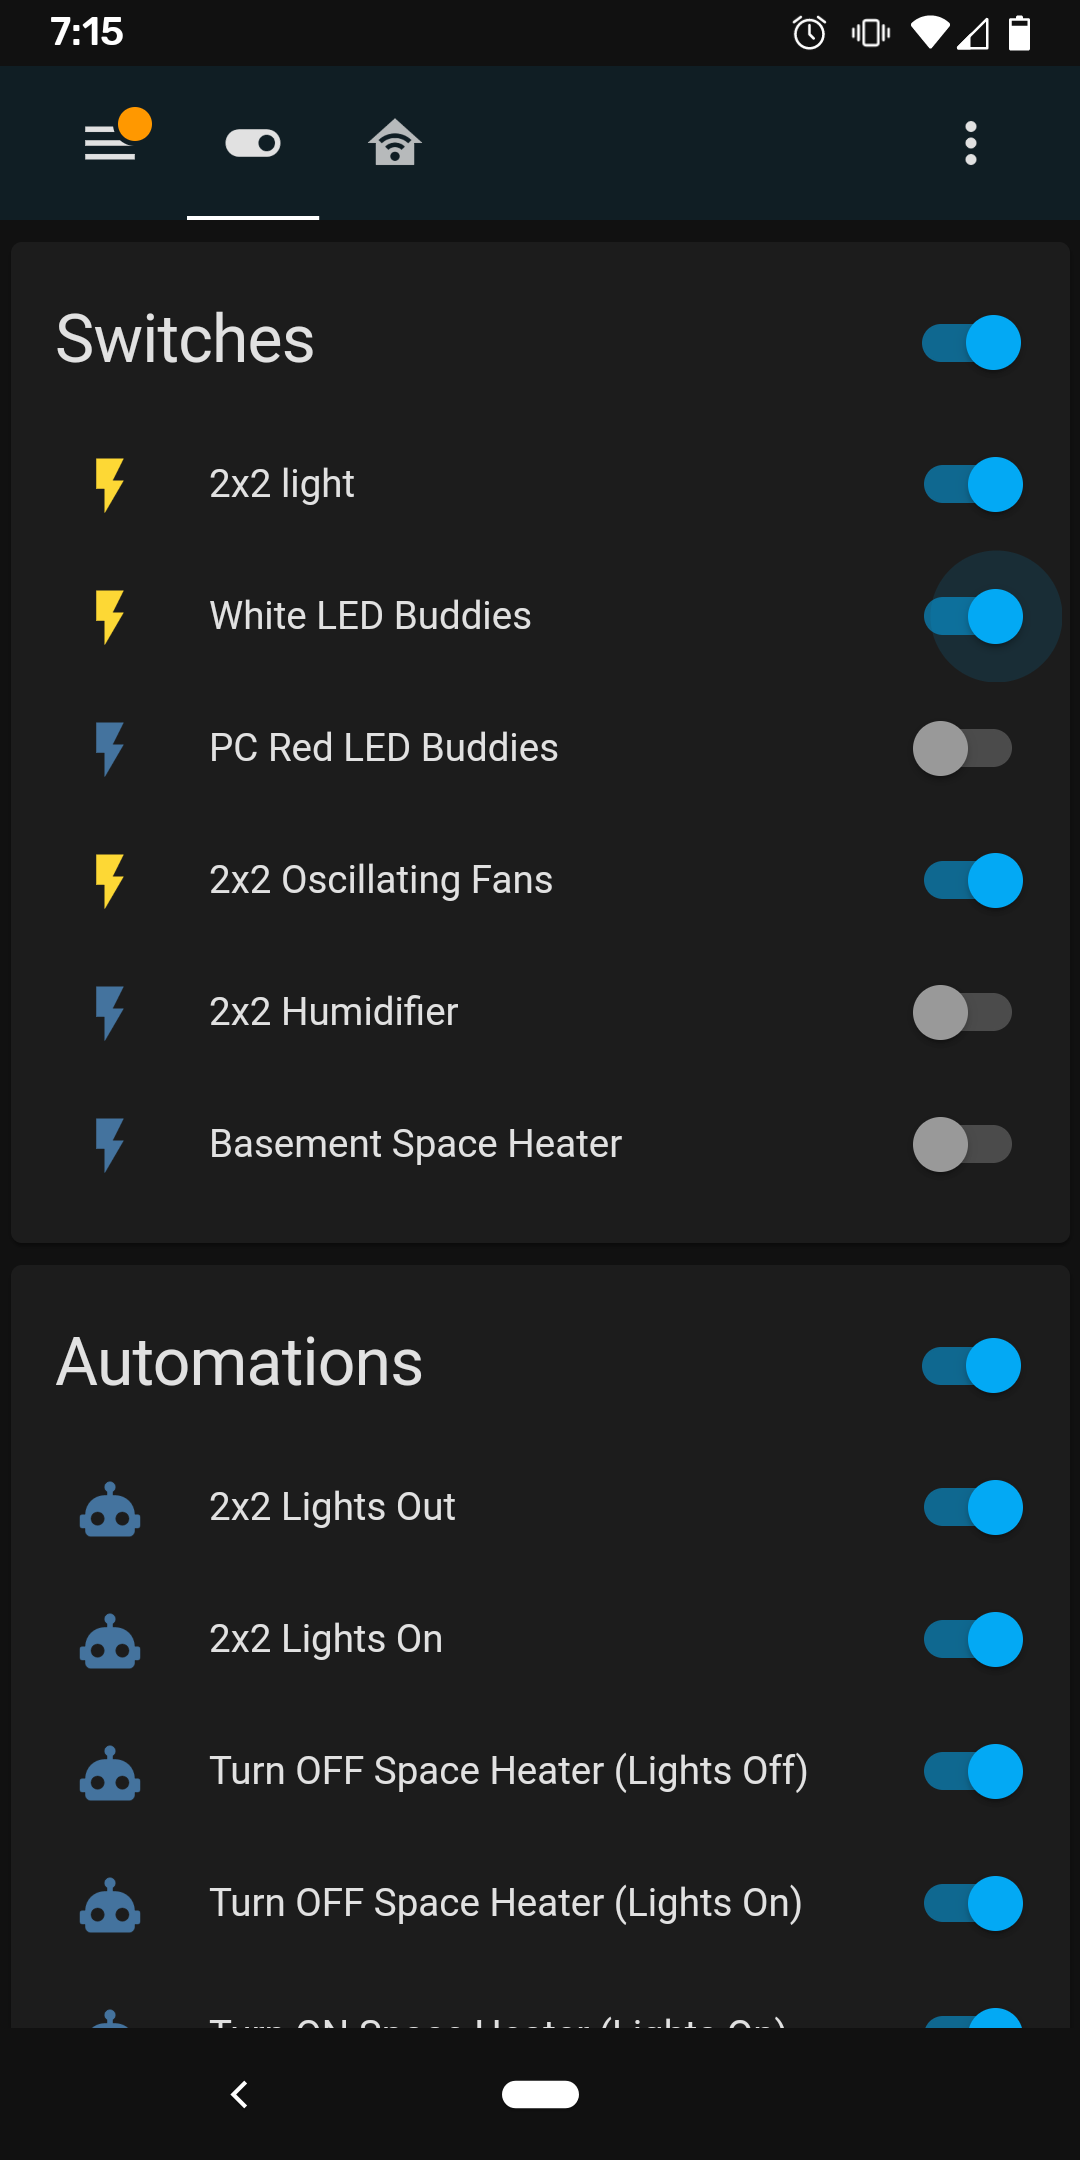 Home Assistant Switches Screenshot.png